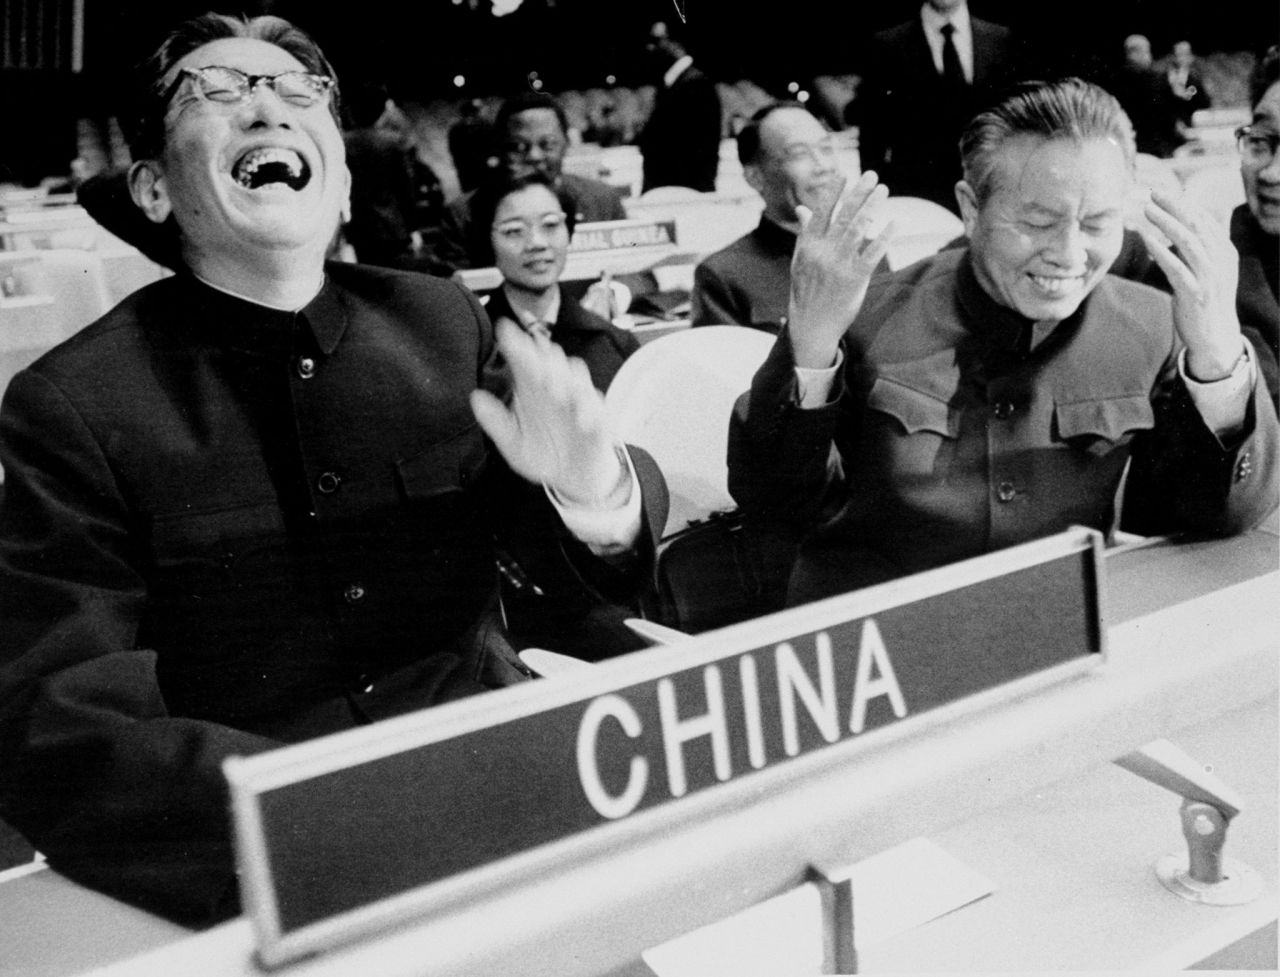 In 1971, the People's Republic of China was recognized by the United Nations as the rightful representative of China. Here, Chinese Foreign Minister Qiao Guanhua, left, and UN Representative Huang Hua laugh as they take their seats at the United Nations General Assembly for the first time.